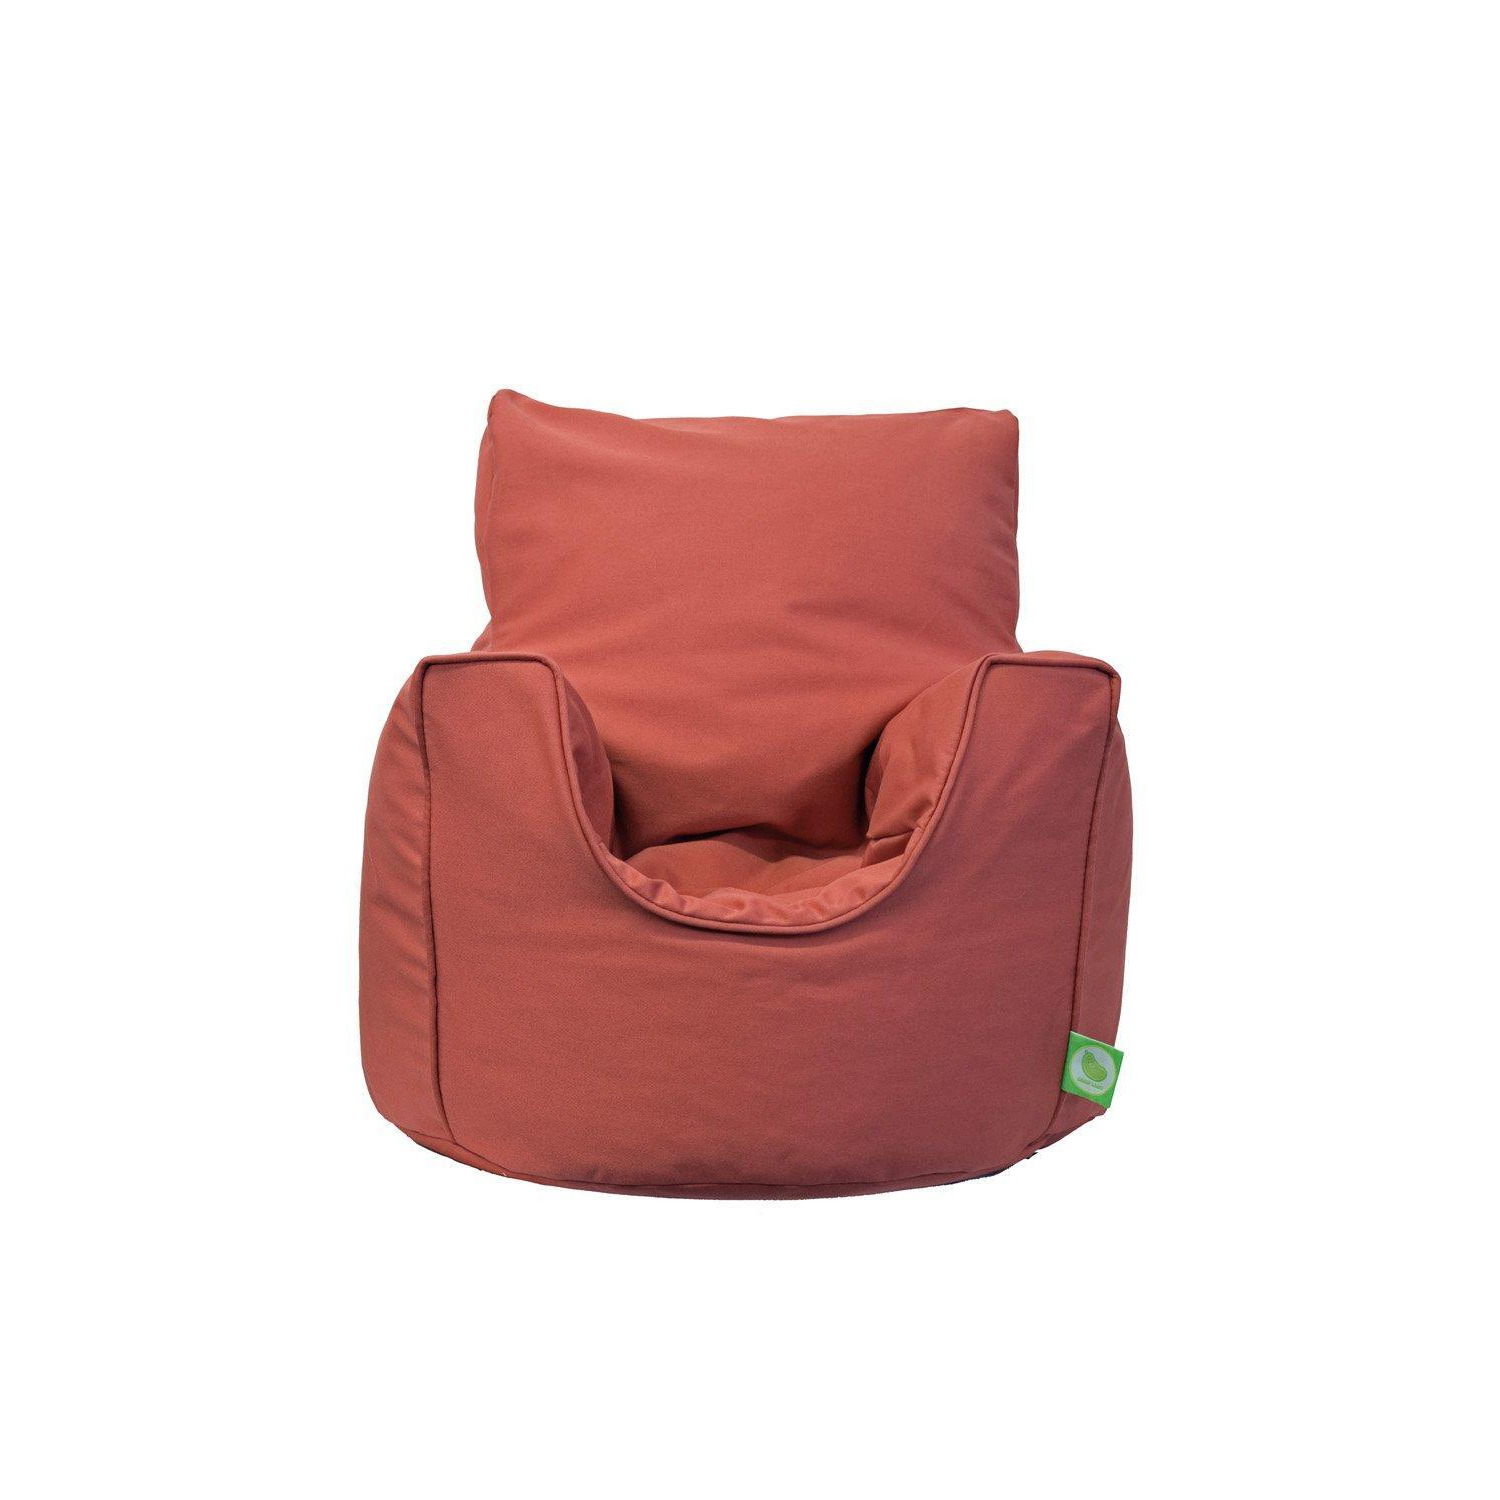 Cotton Twill Terracotta Bean Bag Arm Chair Toddler Size - image 1